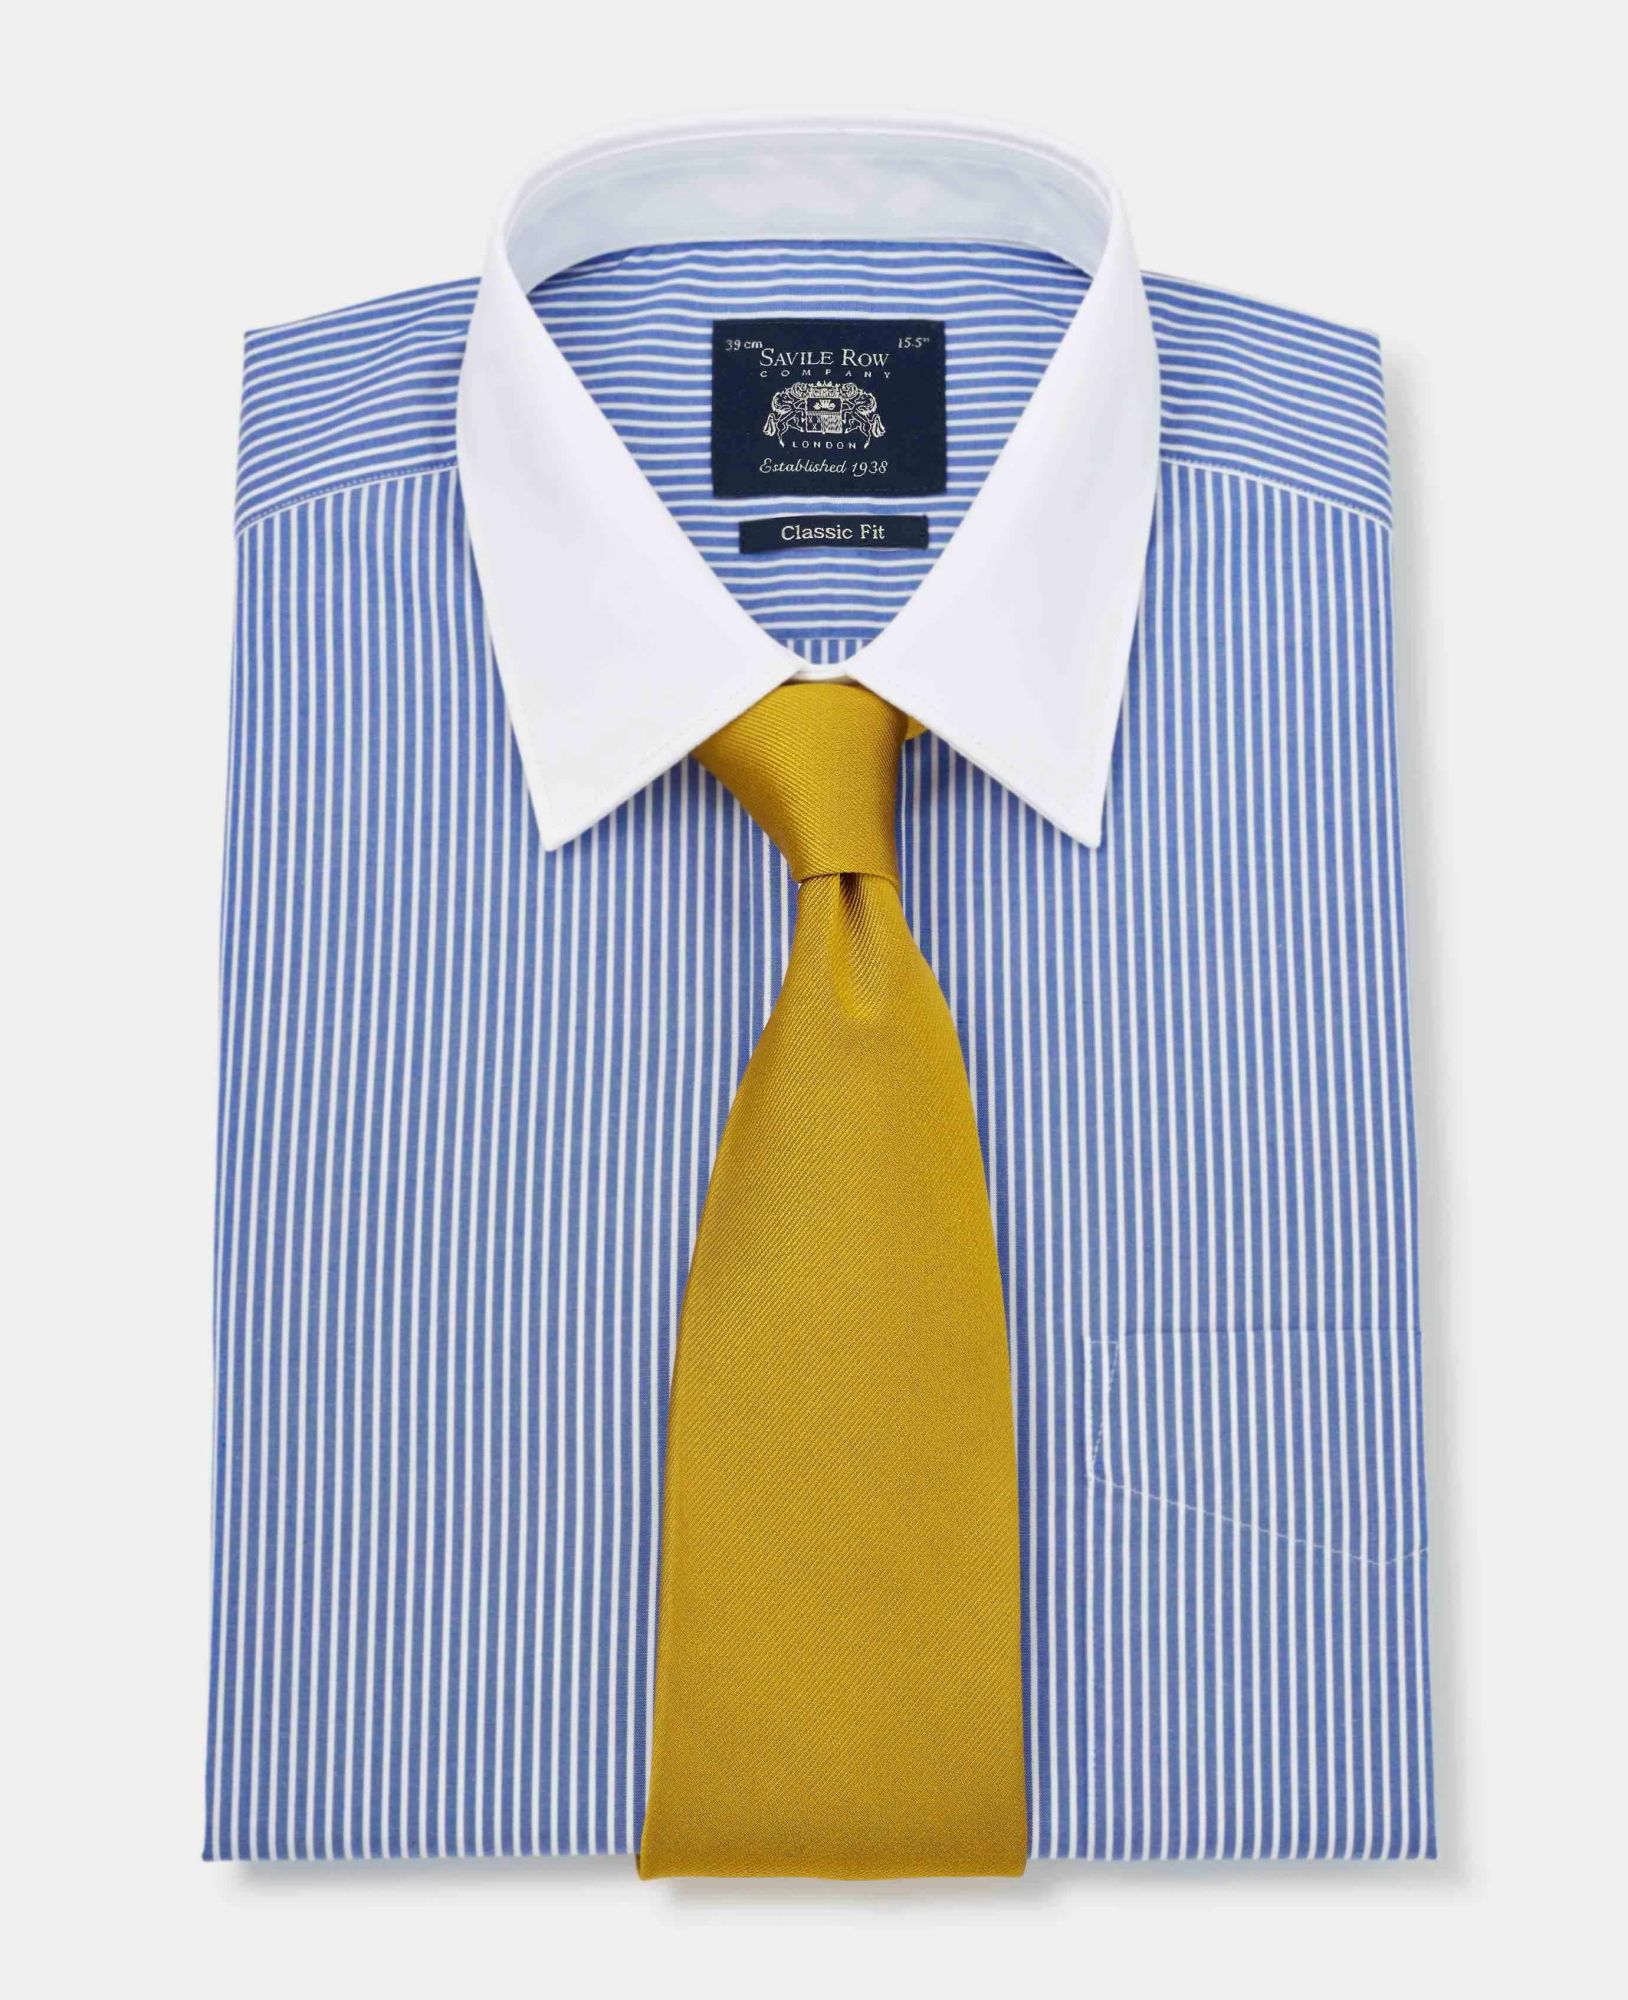 Royal Blue White Stripe Classic Fit Shirt With White Collar & Cuffs - Double Cuff 19